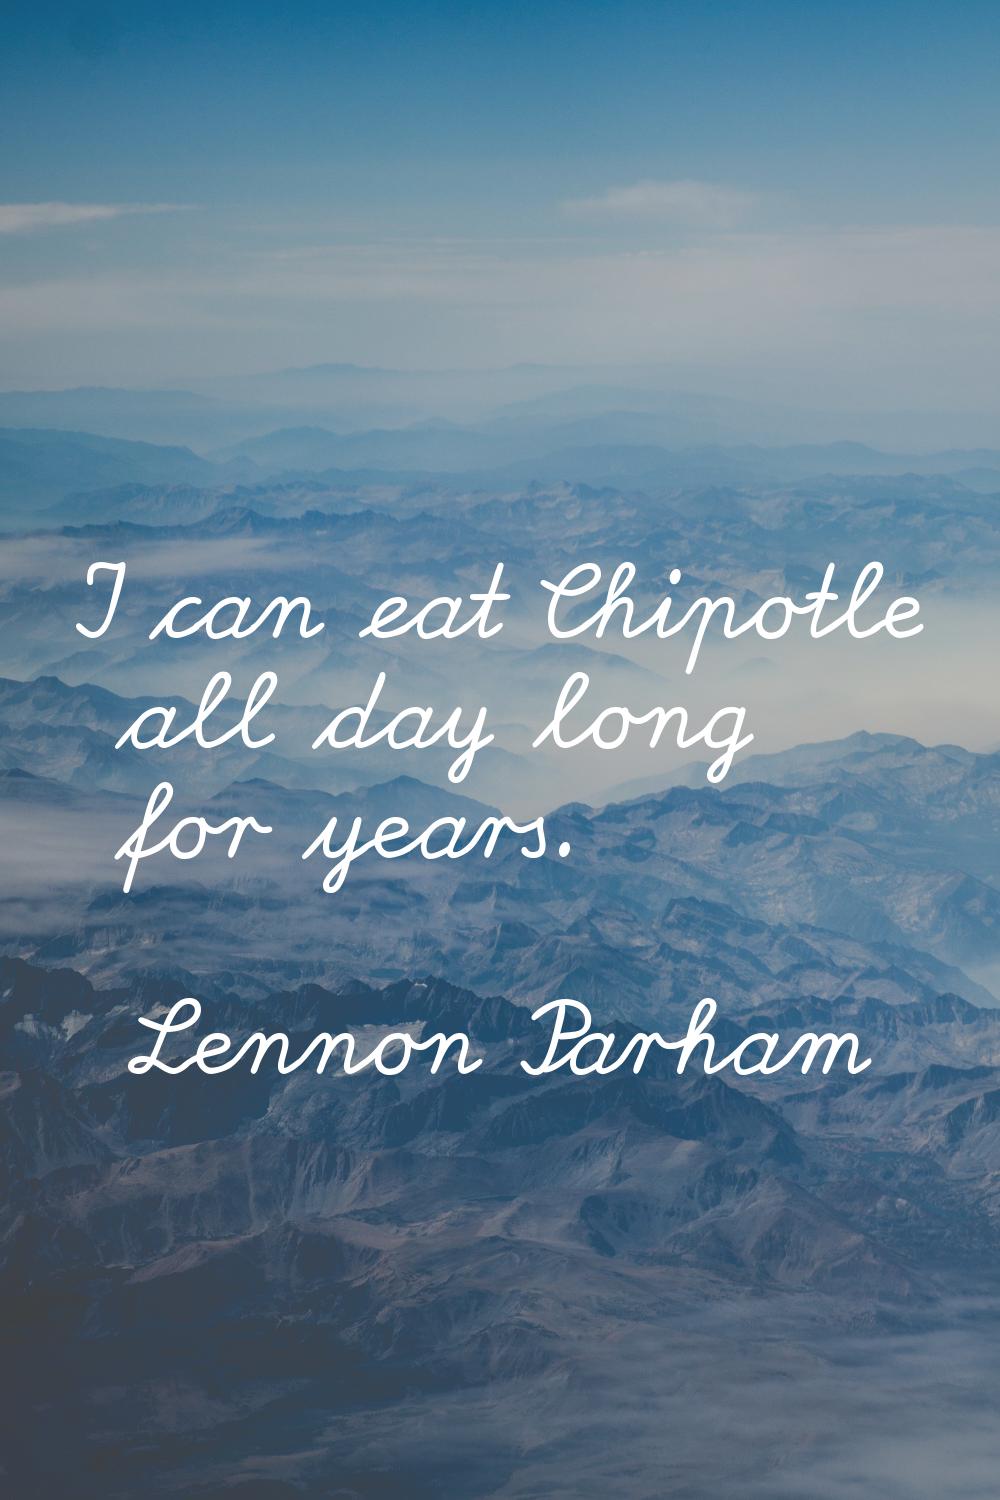 I can eat Chipotle all day long for years.